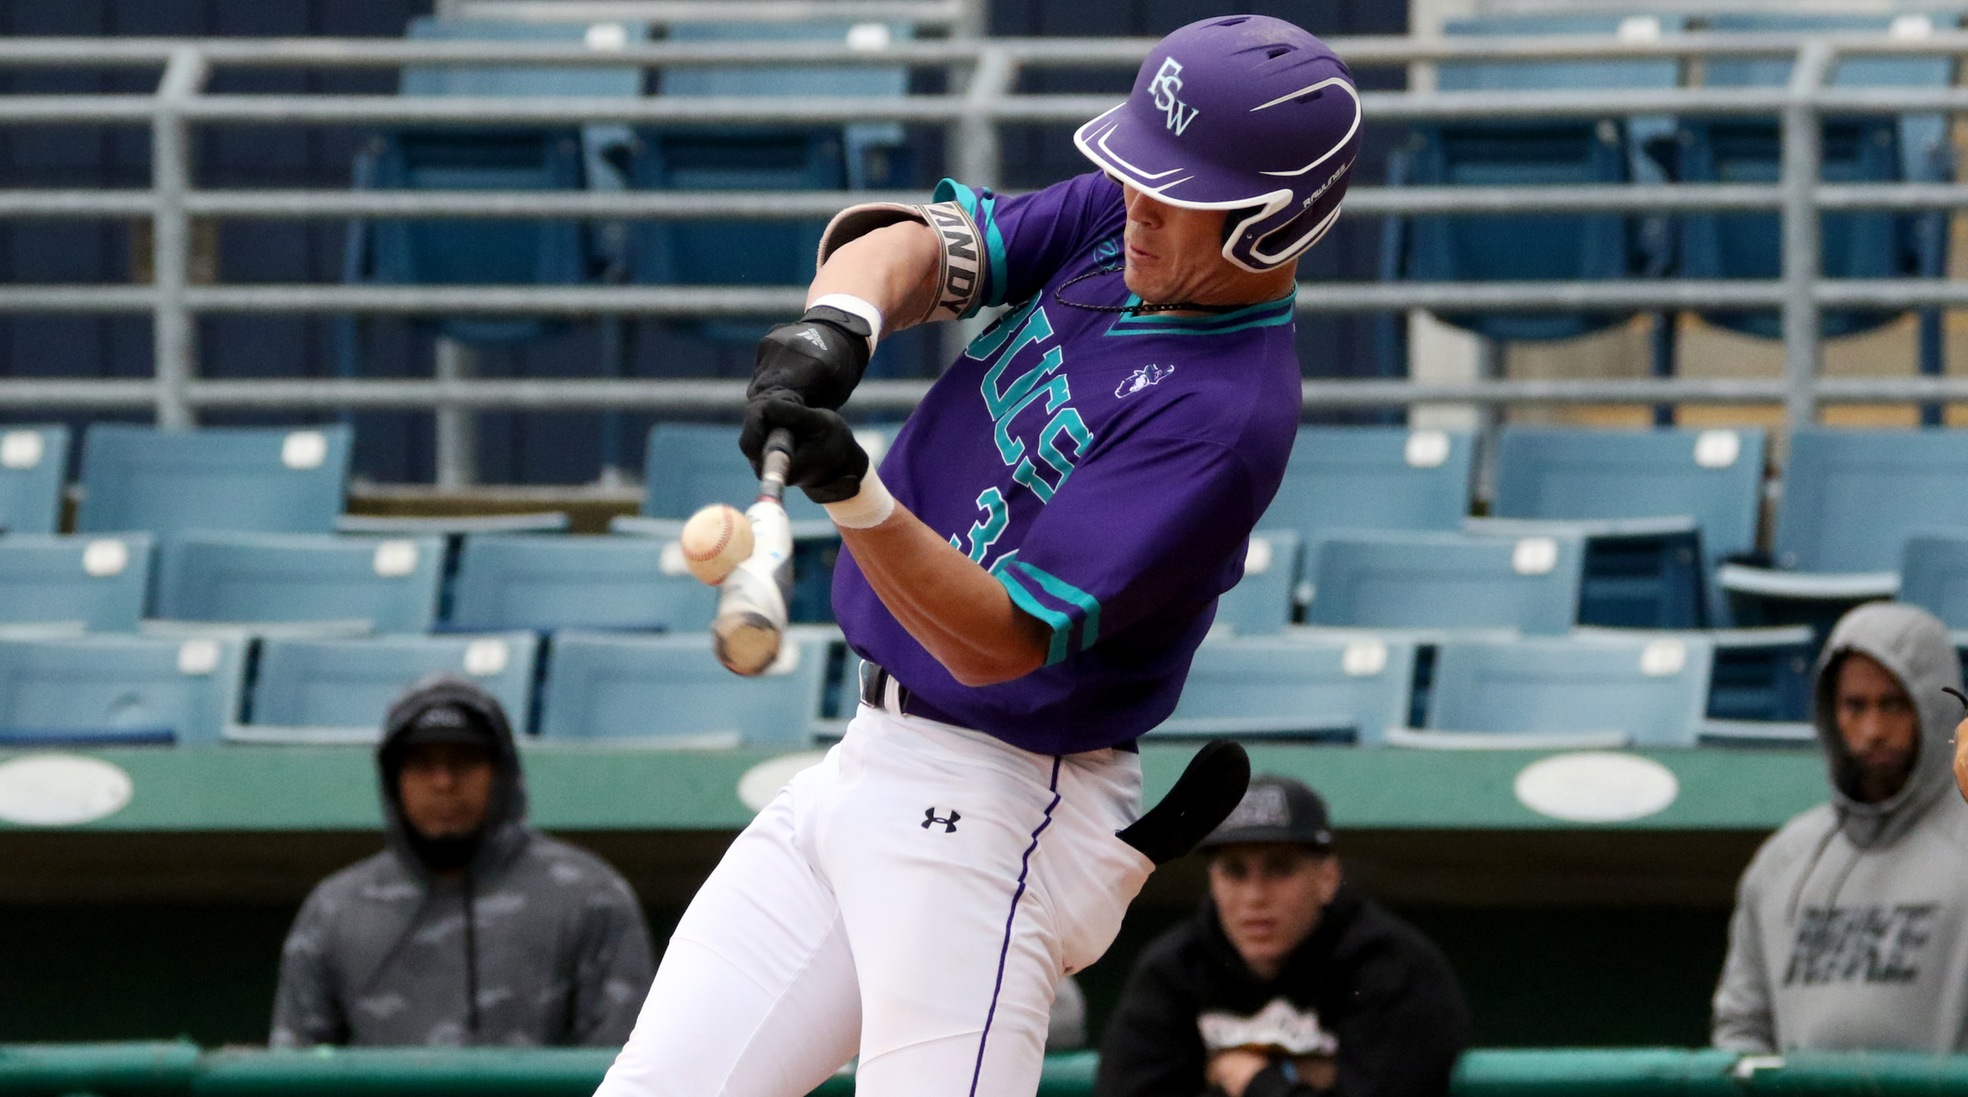 FSW Takes Doubleheader to Finish Off Sweep